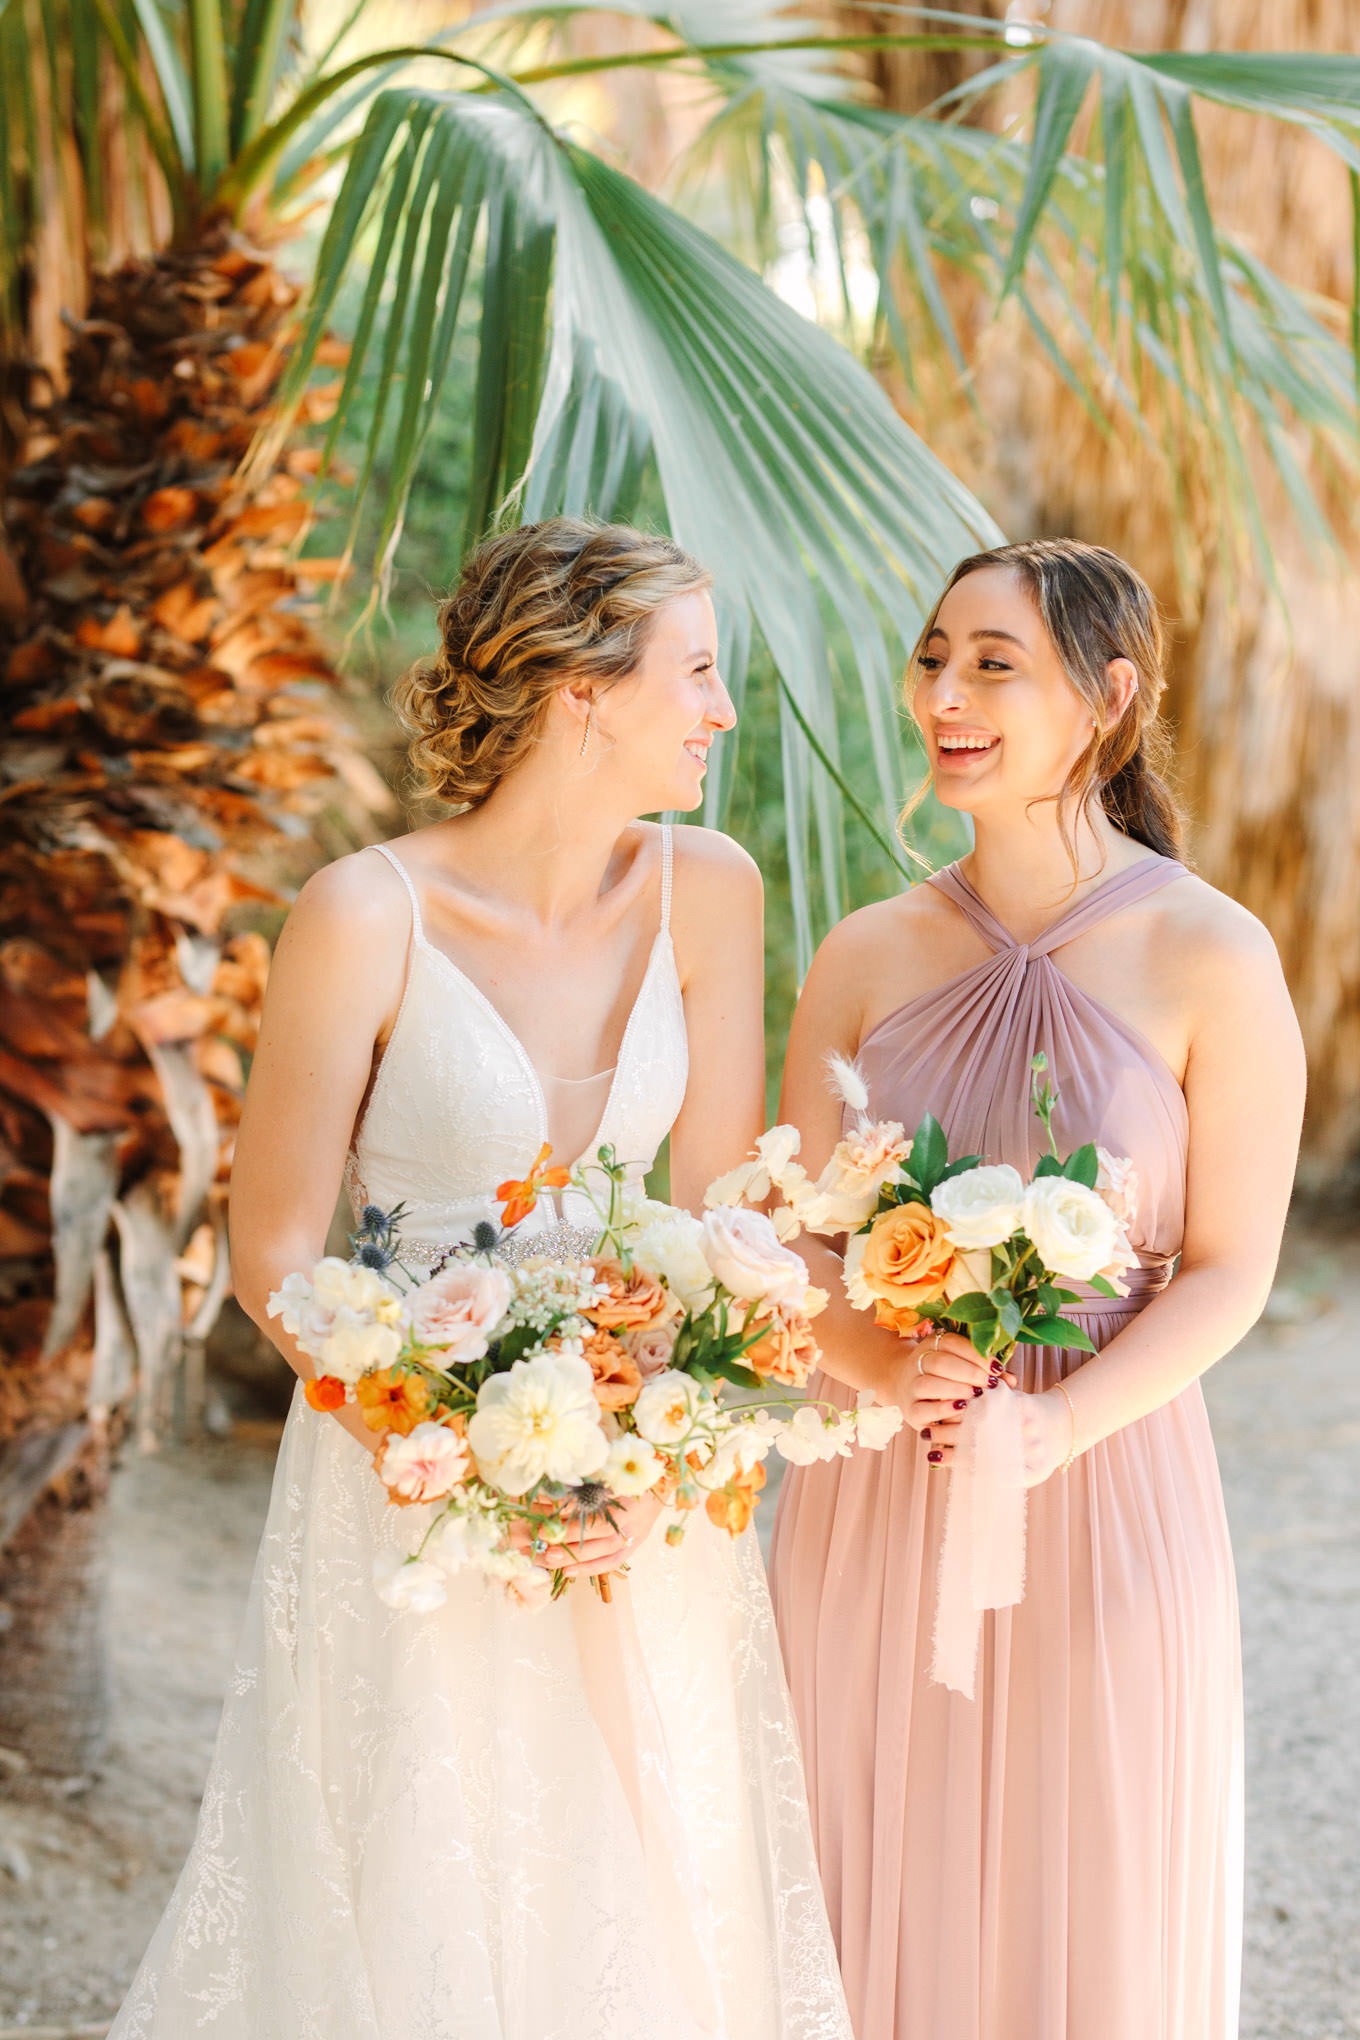 Bride and maid of honor laughing | Living Desert Zoo & Gardens wedding with unique details | Elevated and colorful wedding photography for fun-loving couples in Southern California |  #PalmSprings #palmspringsphotographer #gardenwedding #palmspringswedding  Source: Mary Costa Photography | Los Angeles wedding photographer 